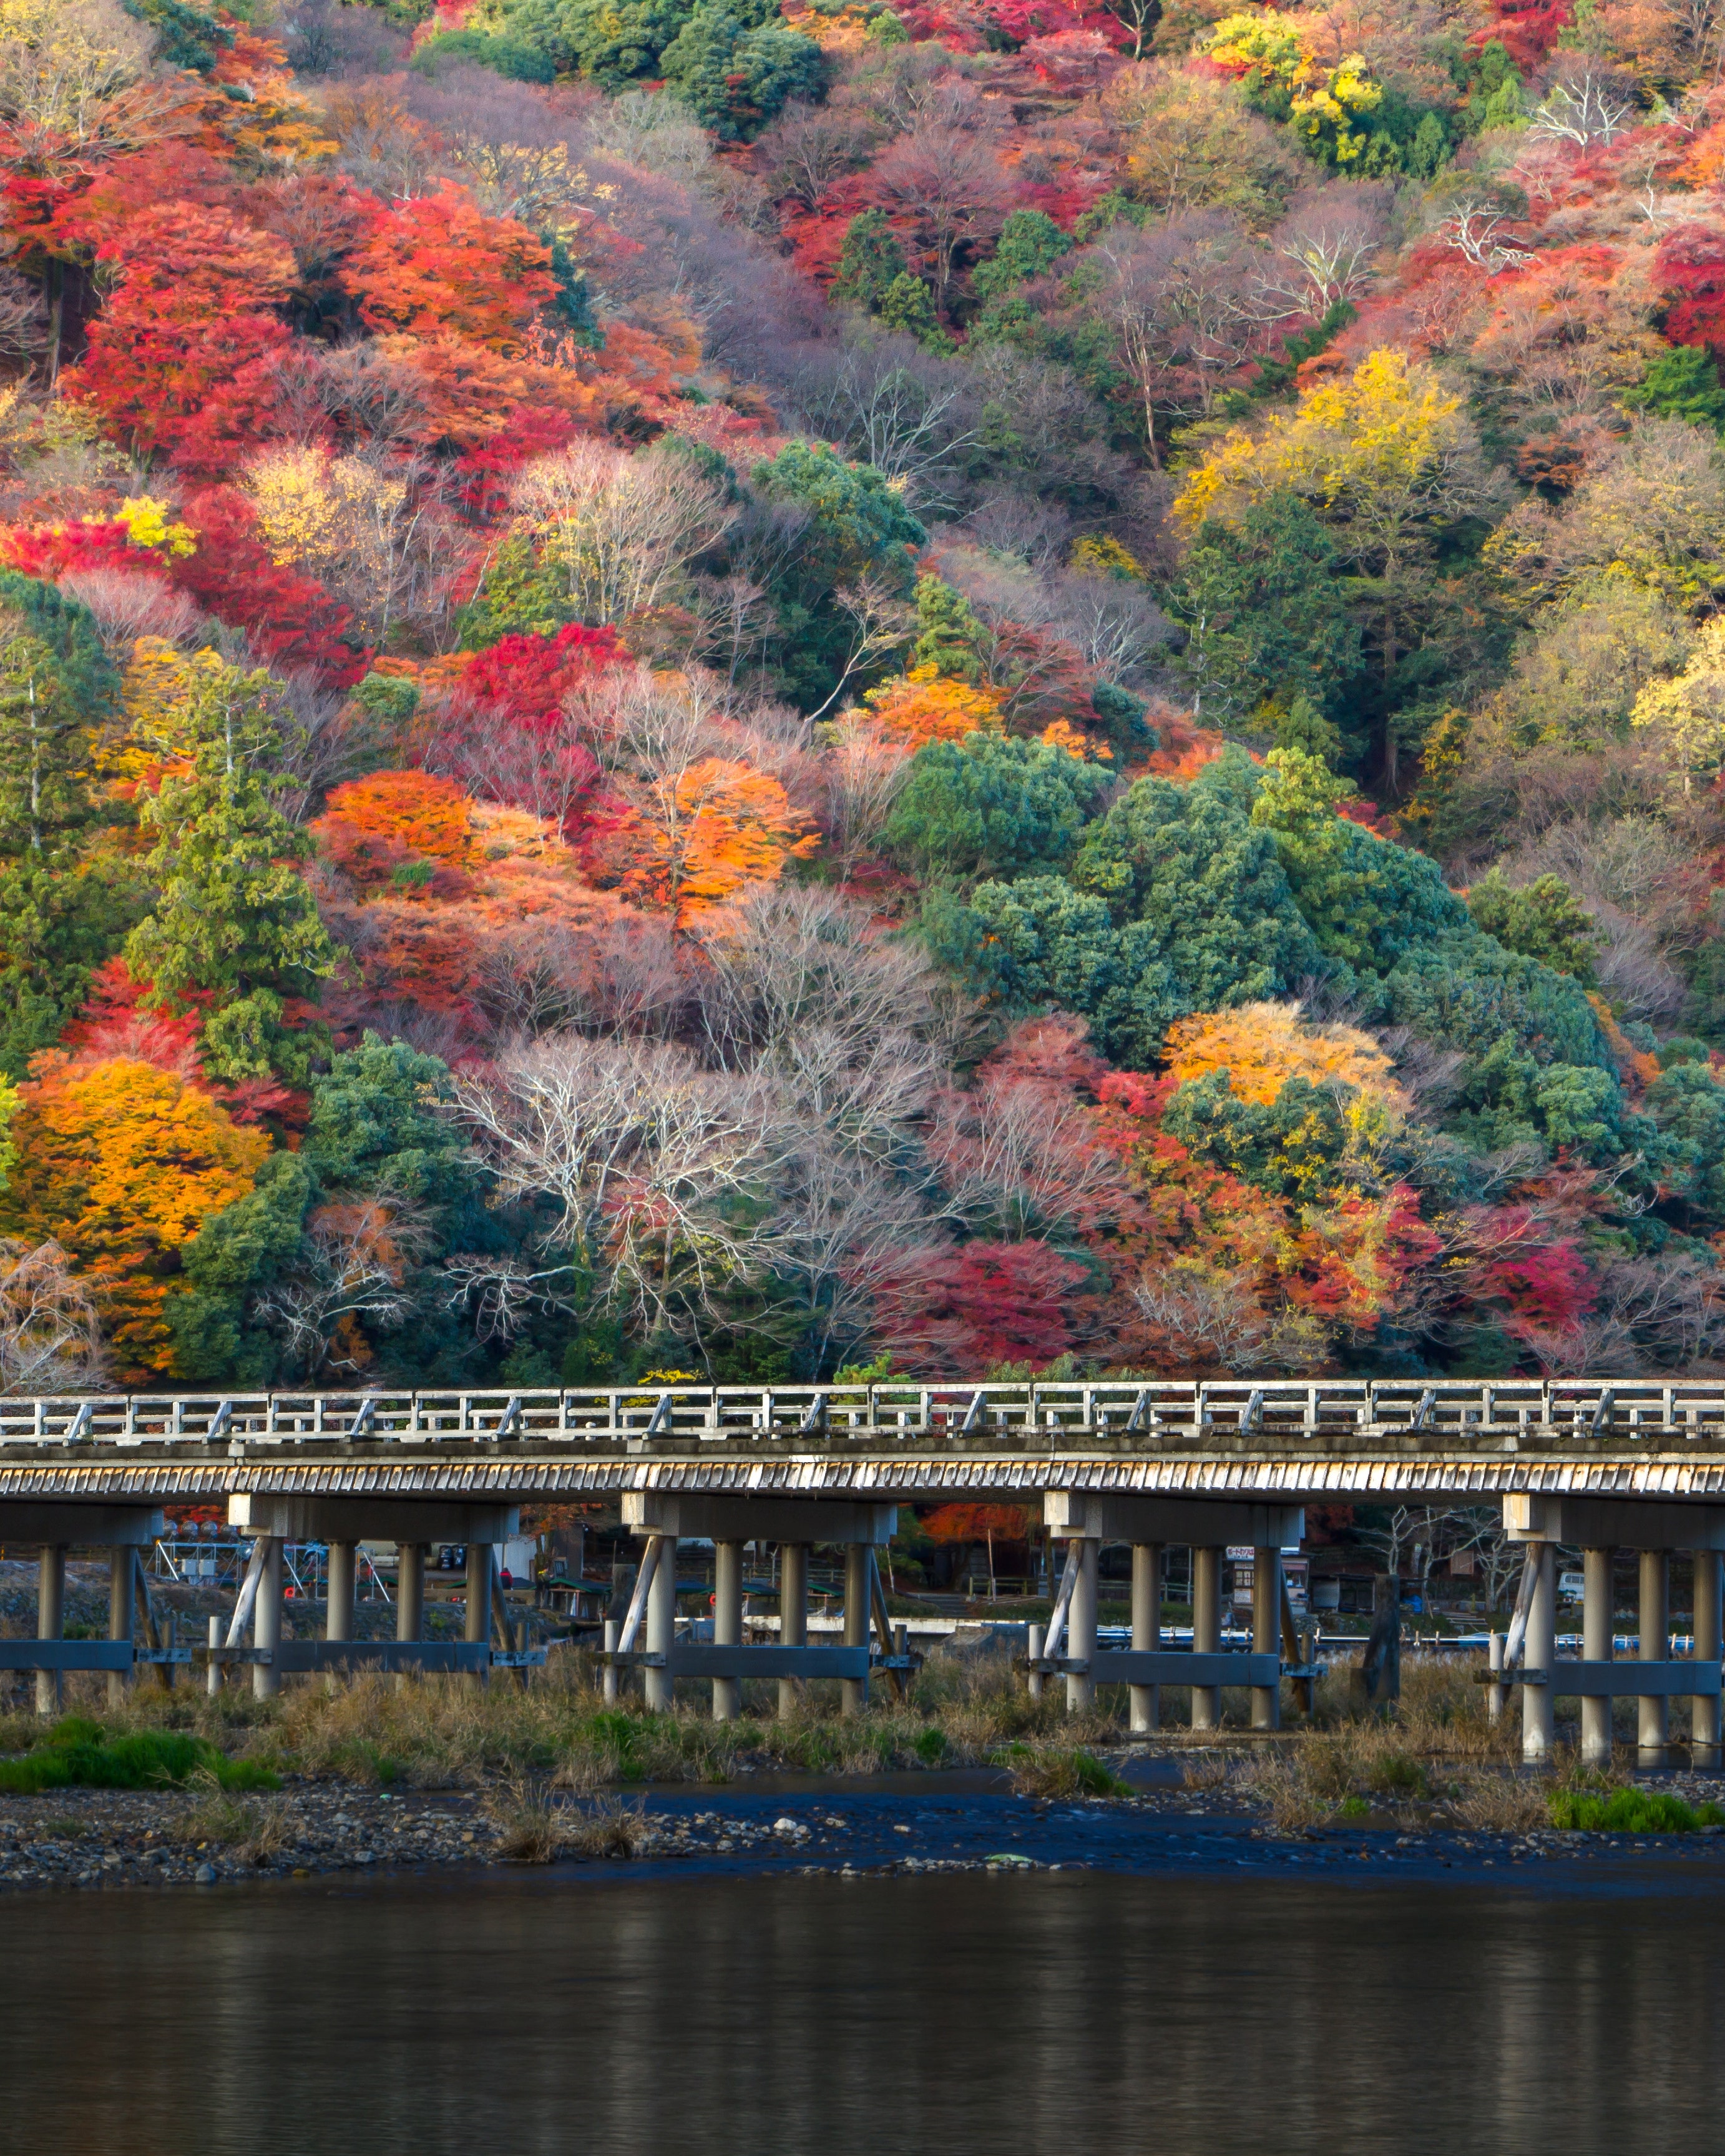 Photo That Will Make You Want to Visit Kyoto. Condé Nast Traveler